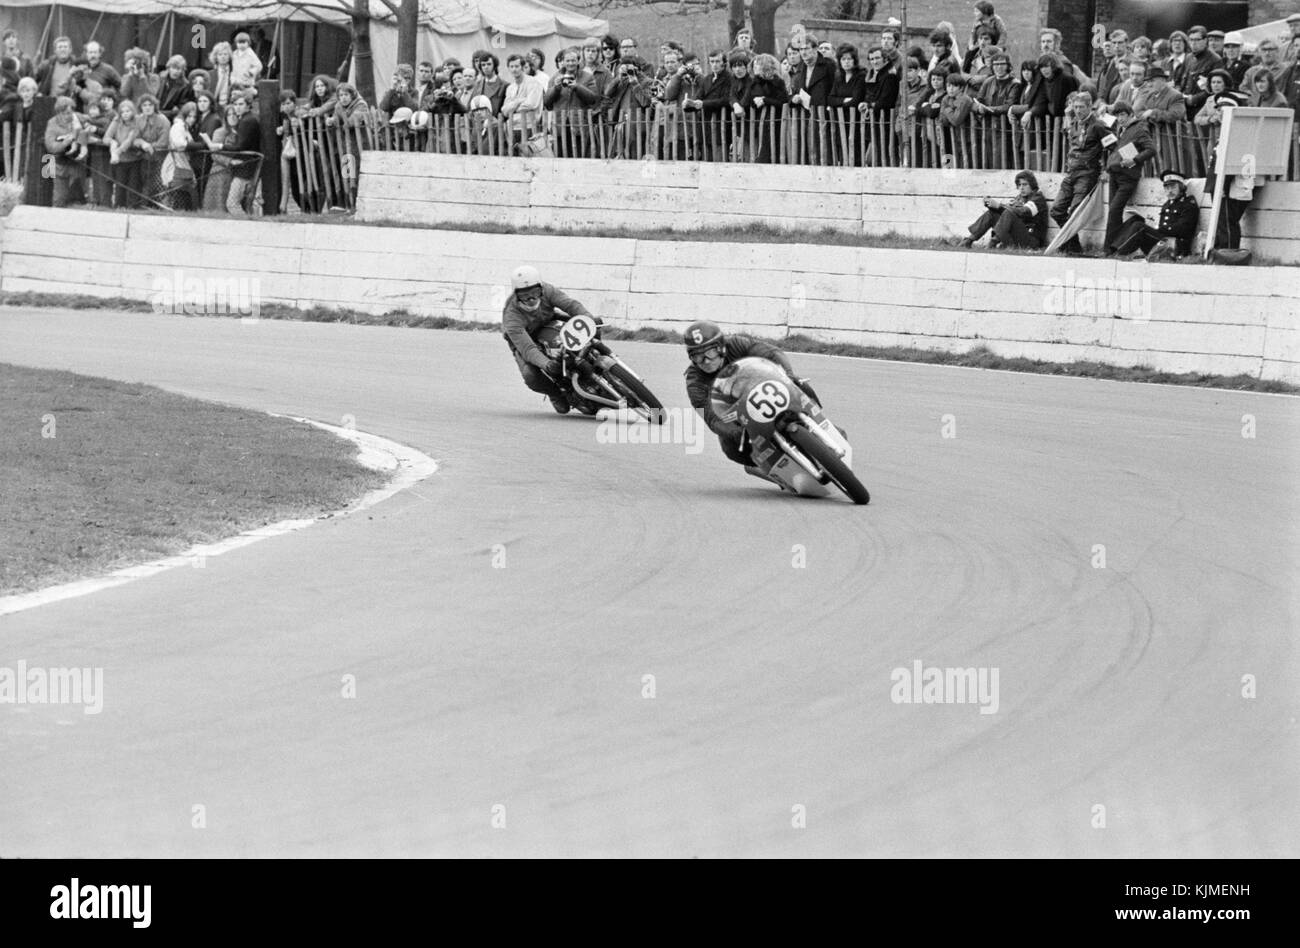 Motorcycle racing at Crystal Palace in England in 1972. This was the final year of racing at this circuit, and the circuit was closed in 1974 due to safety concerns. Stock Photo